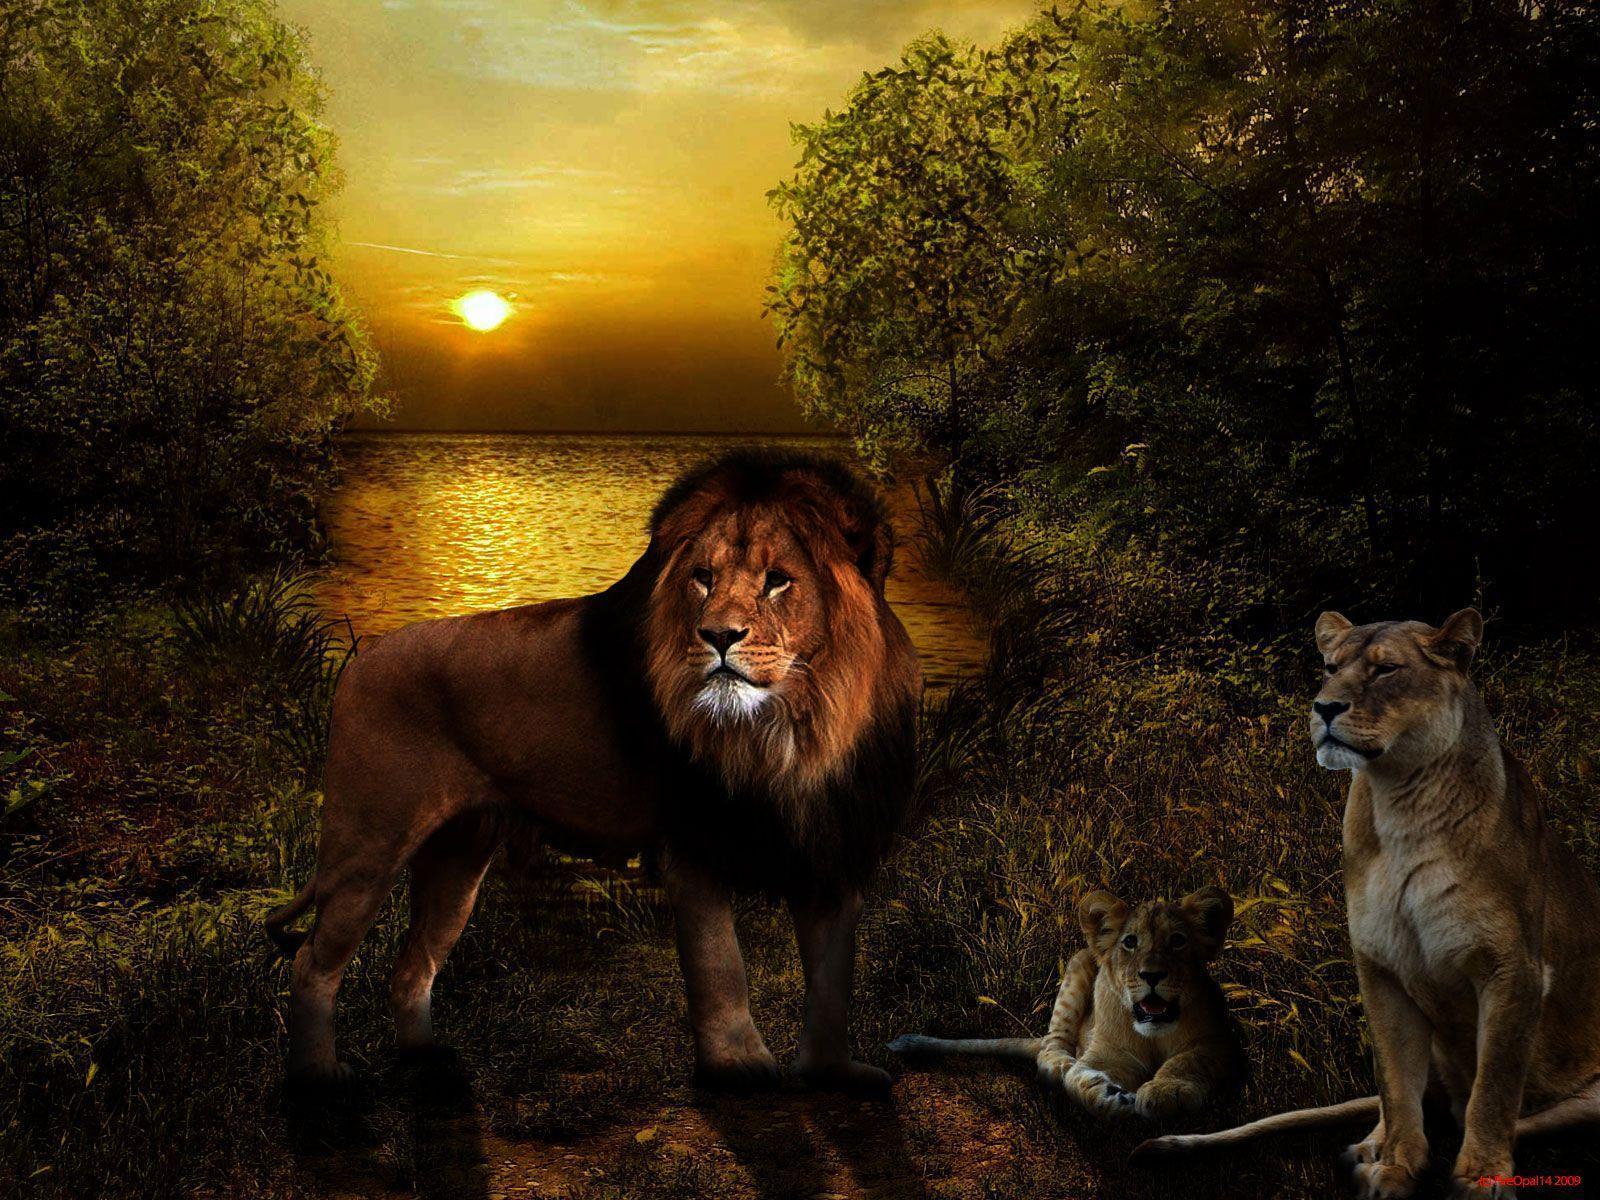 Lion Picture Wallpaper, 42 Lion HDQ Image. NMgnCP PC Gallery